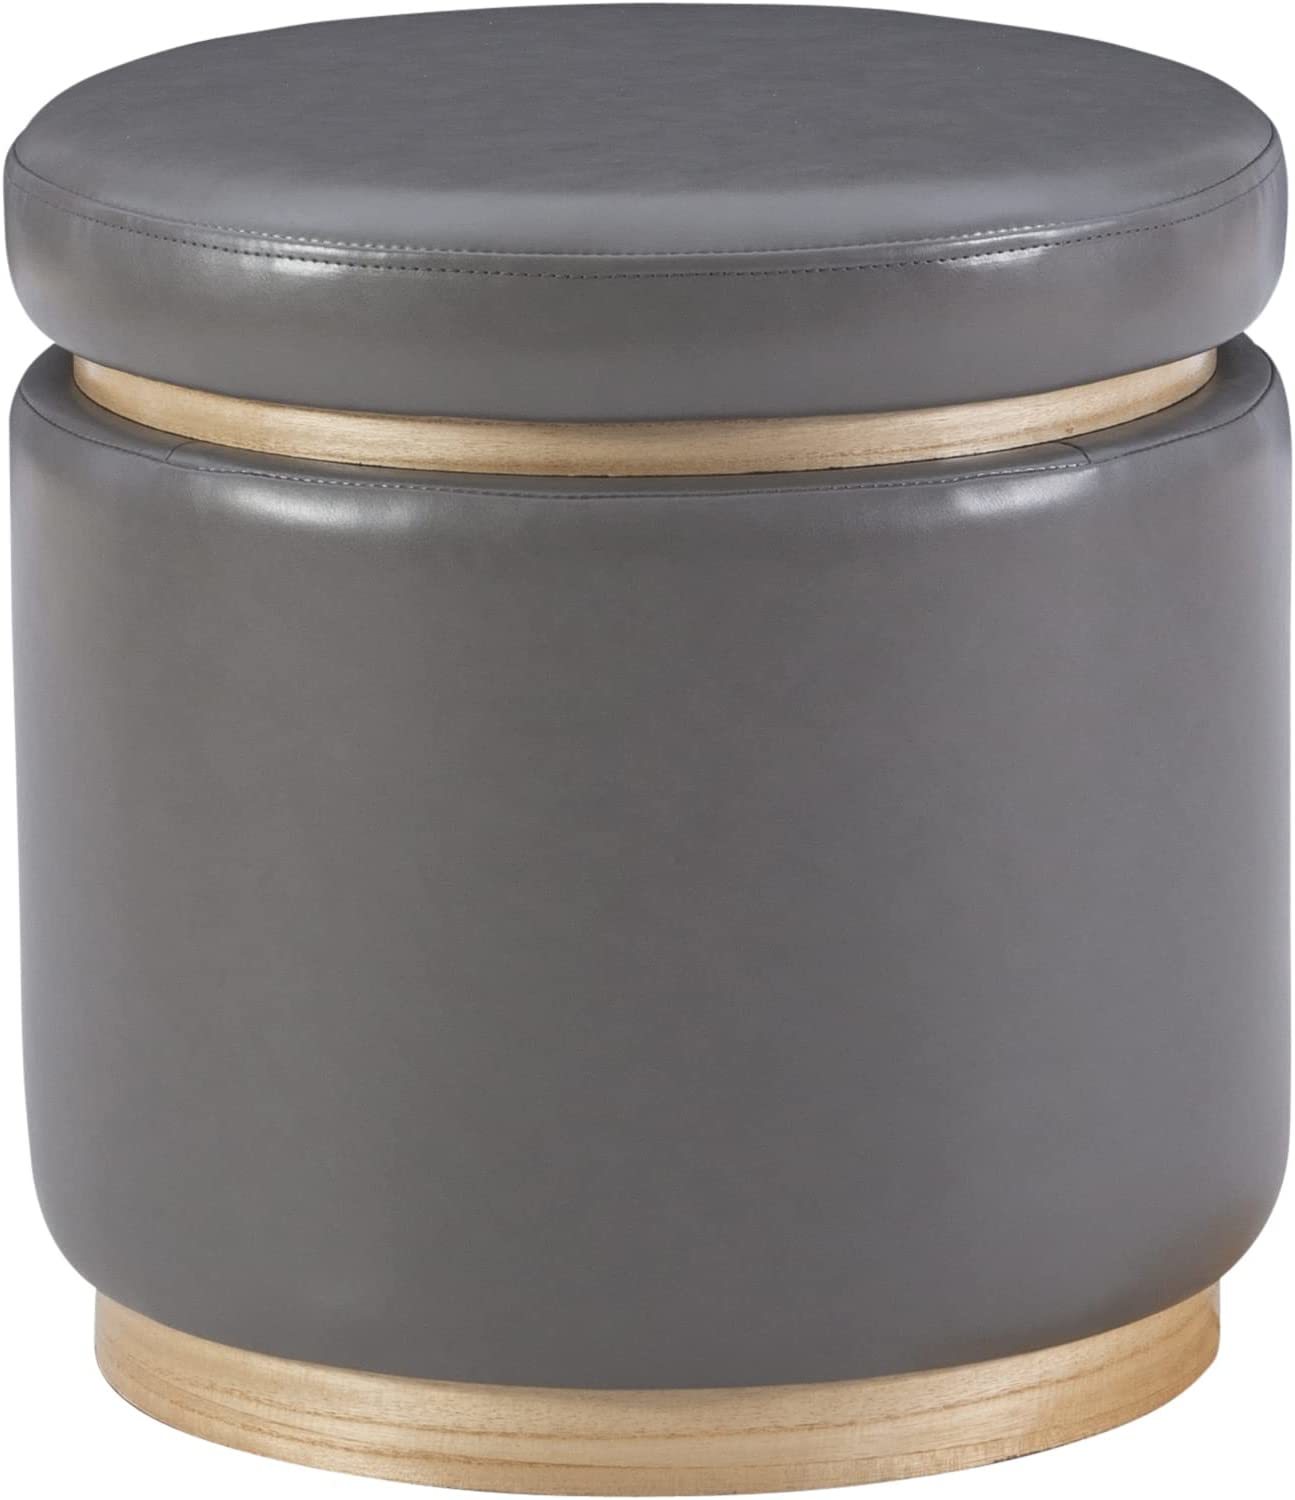 Lexington Grey Faux Leather Round Storage Ottoman with Wood Accent by Linon - $89.99